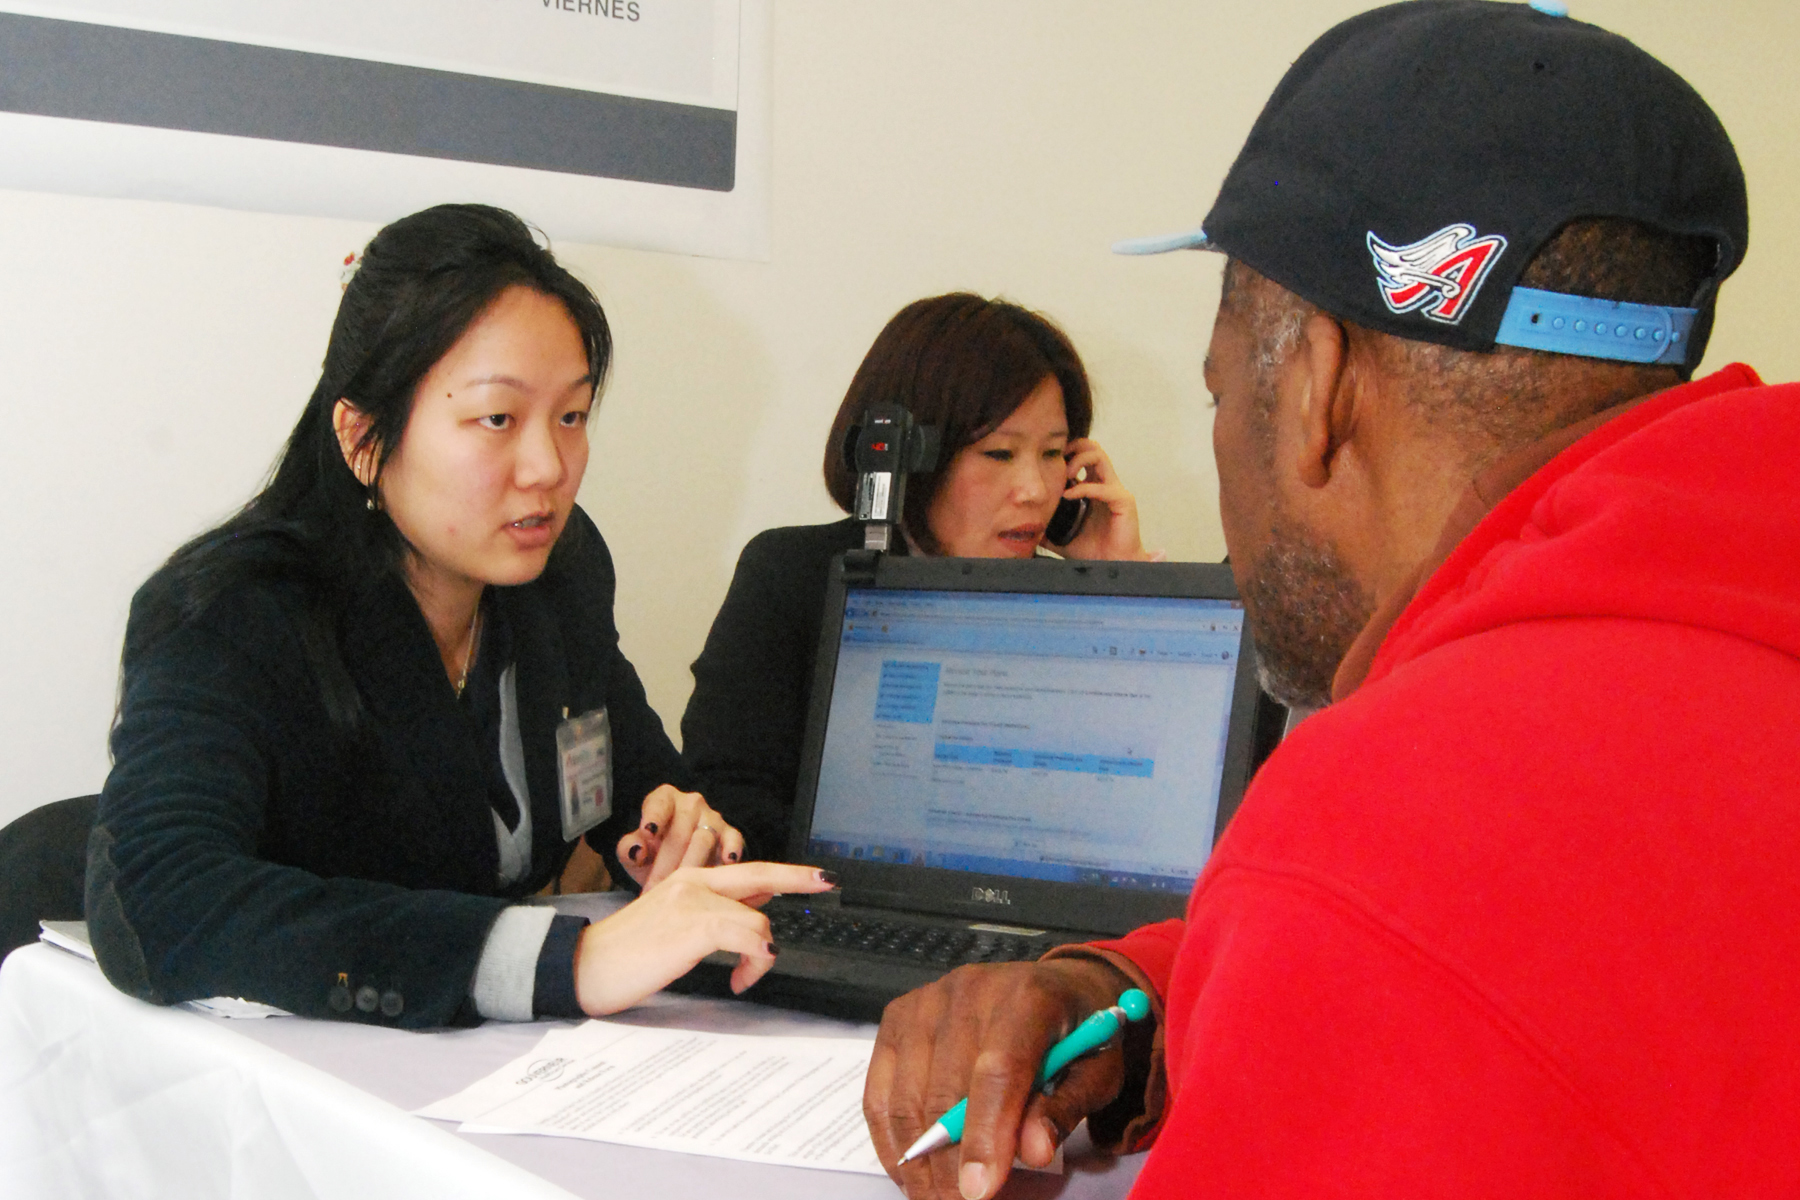 Free workshops help New Yorkers prepare for open enrollment period